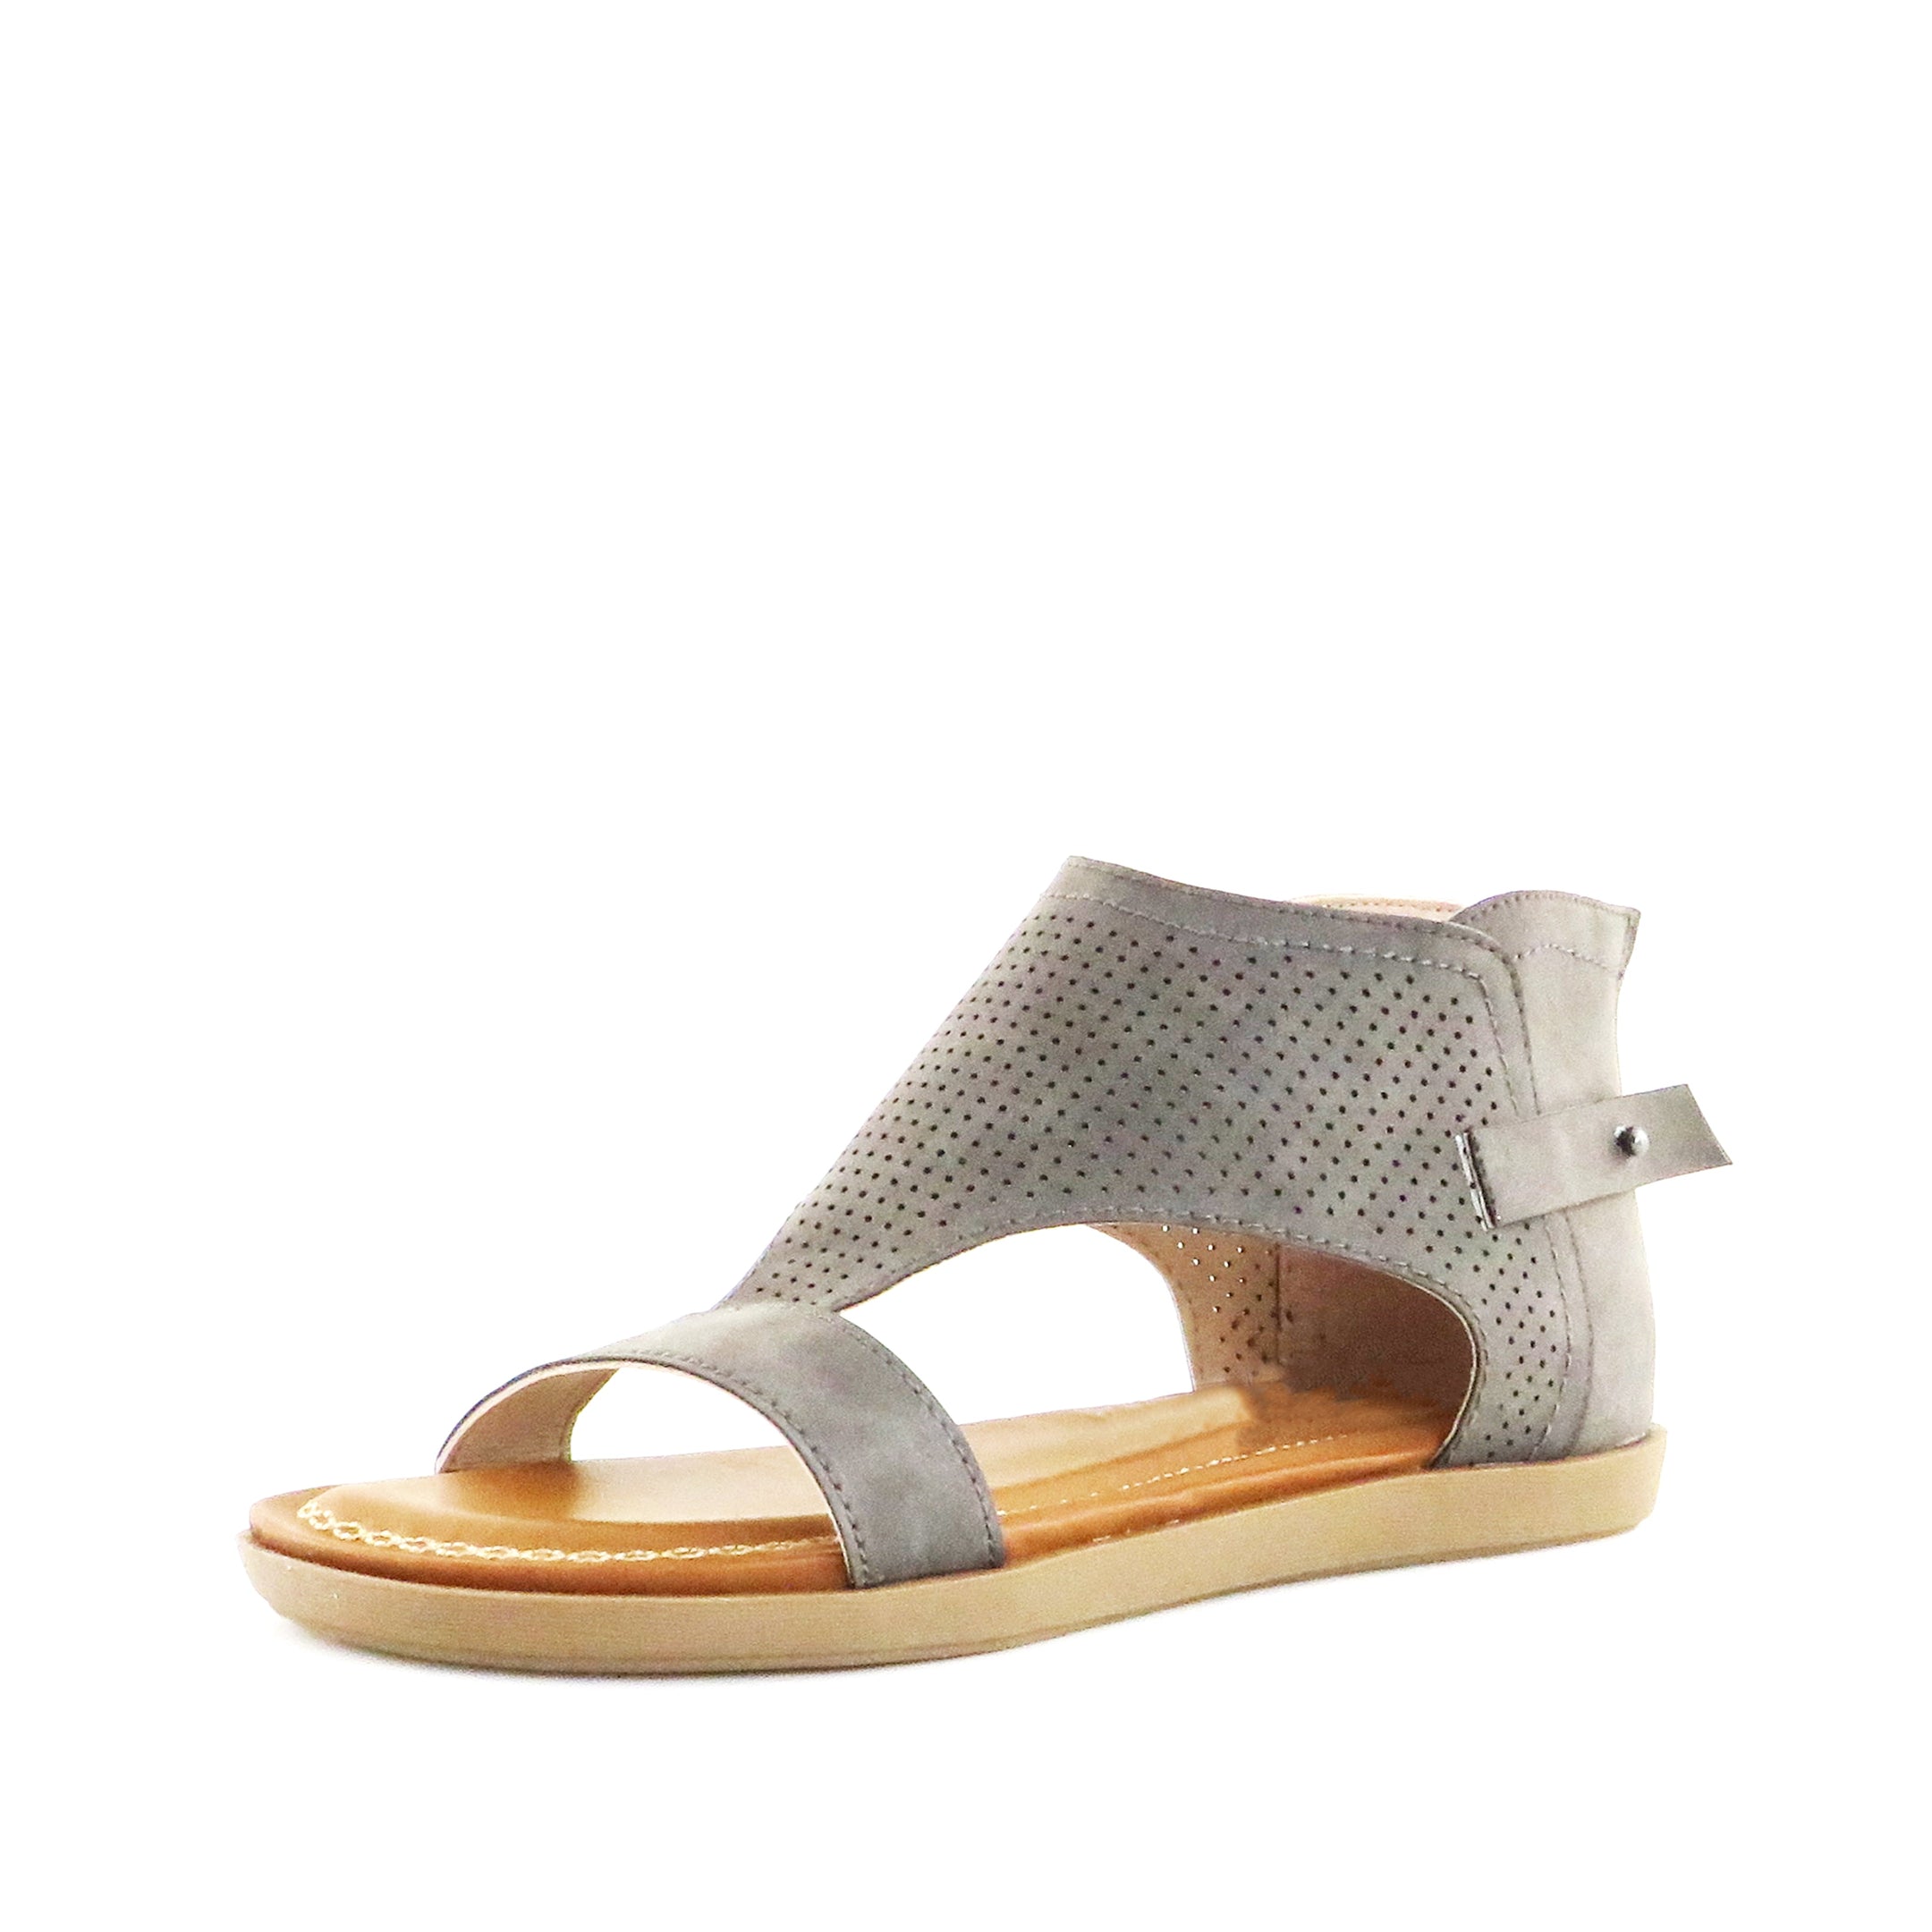 Buy Women's Coop Slate Perforated Sandal by Nest Shoes